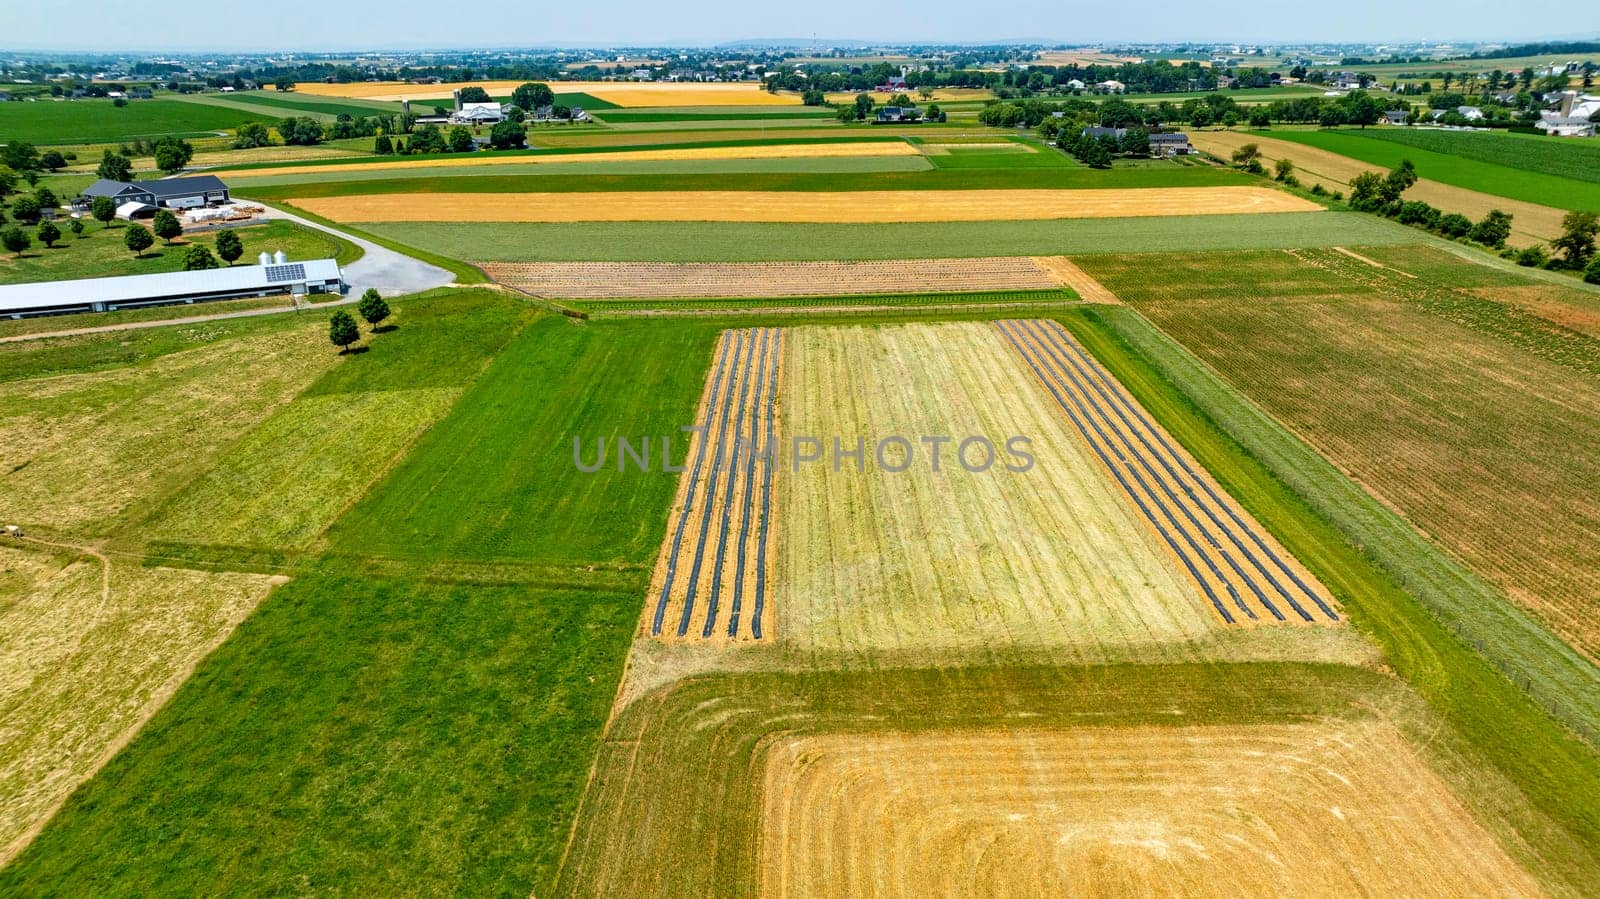 An Aerial View of Expansive Farmland with Crops and Pastures